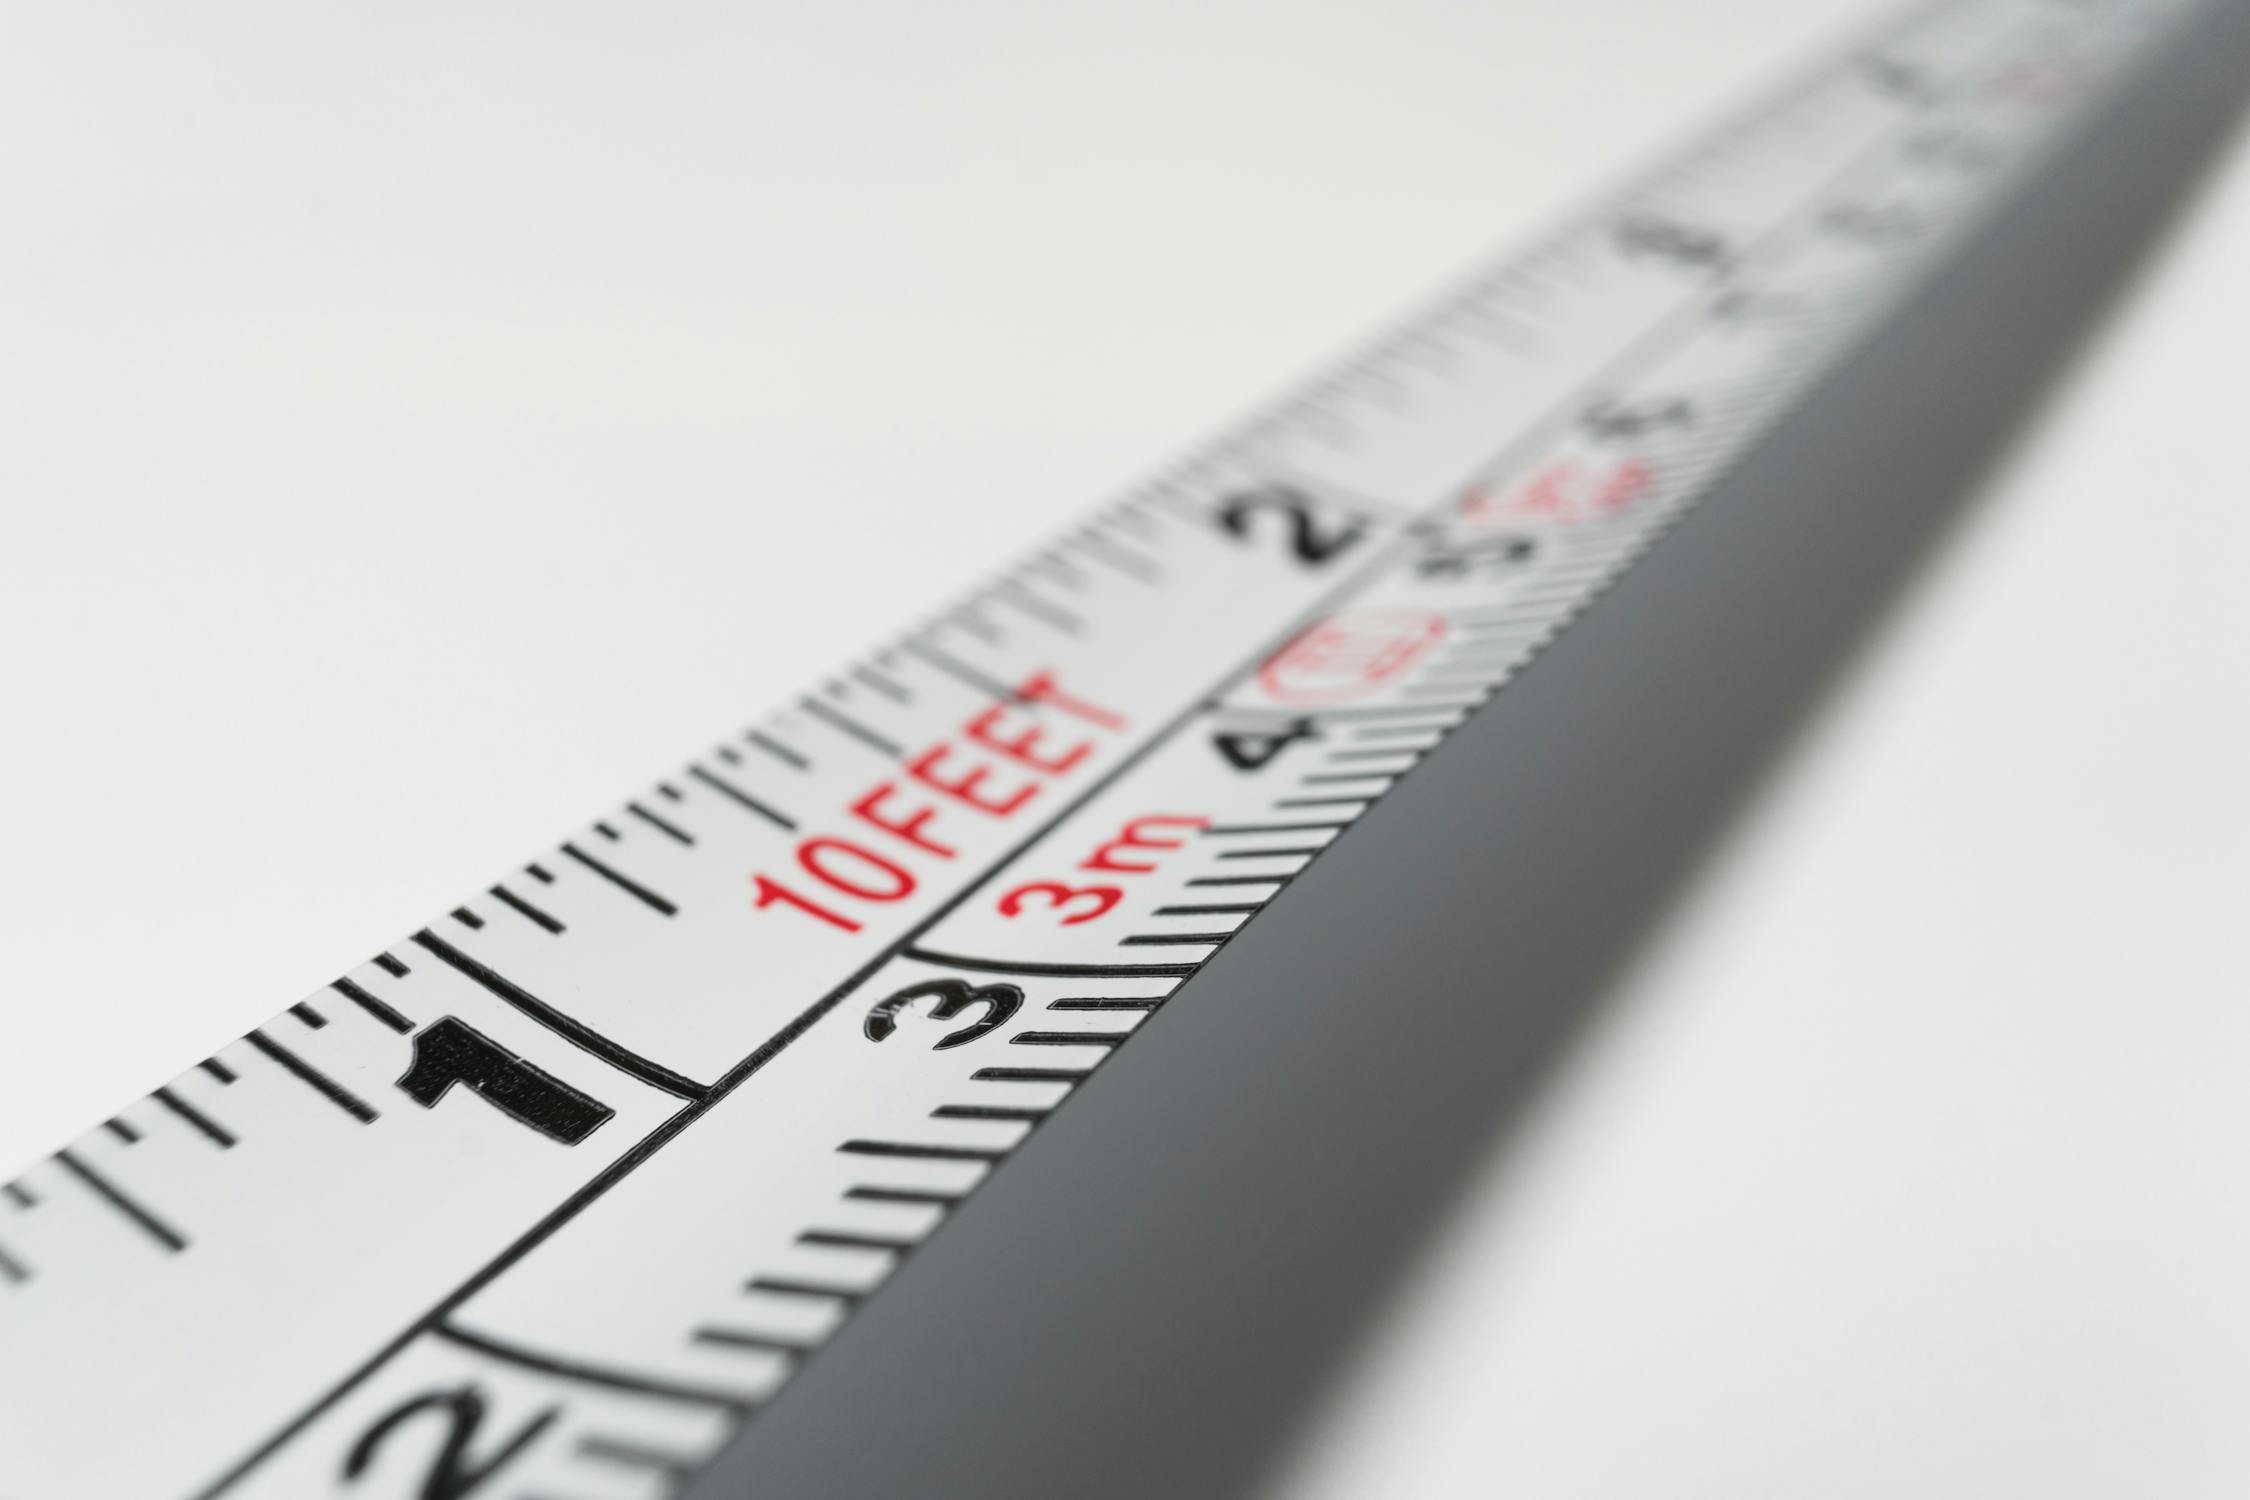 A measuring tape because the distance is important for international shipping.